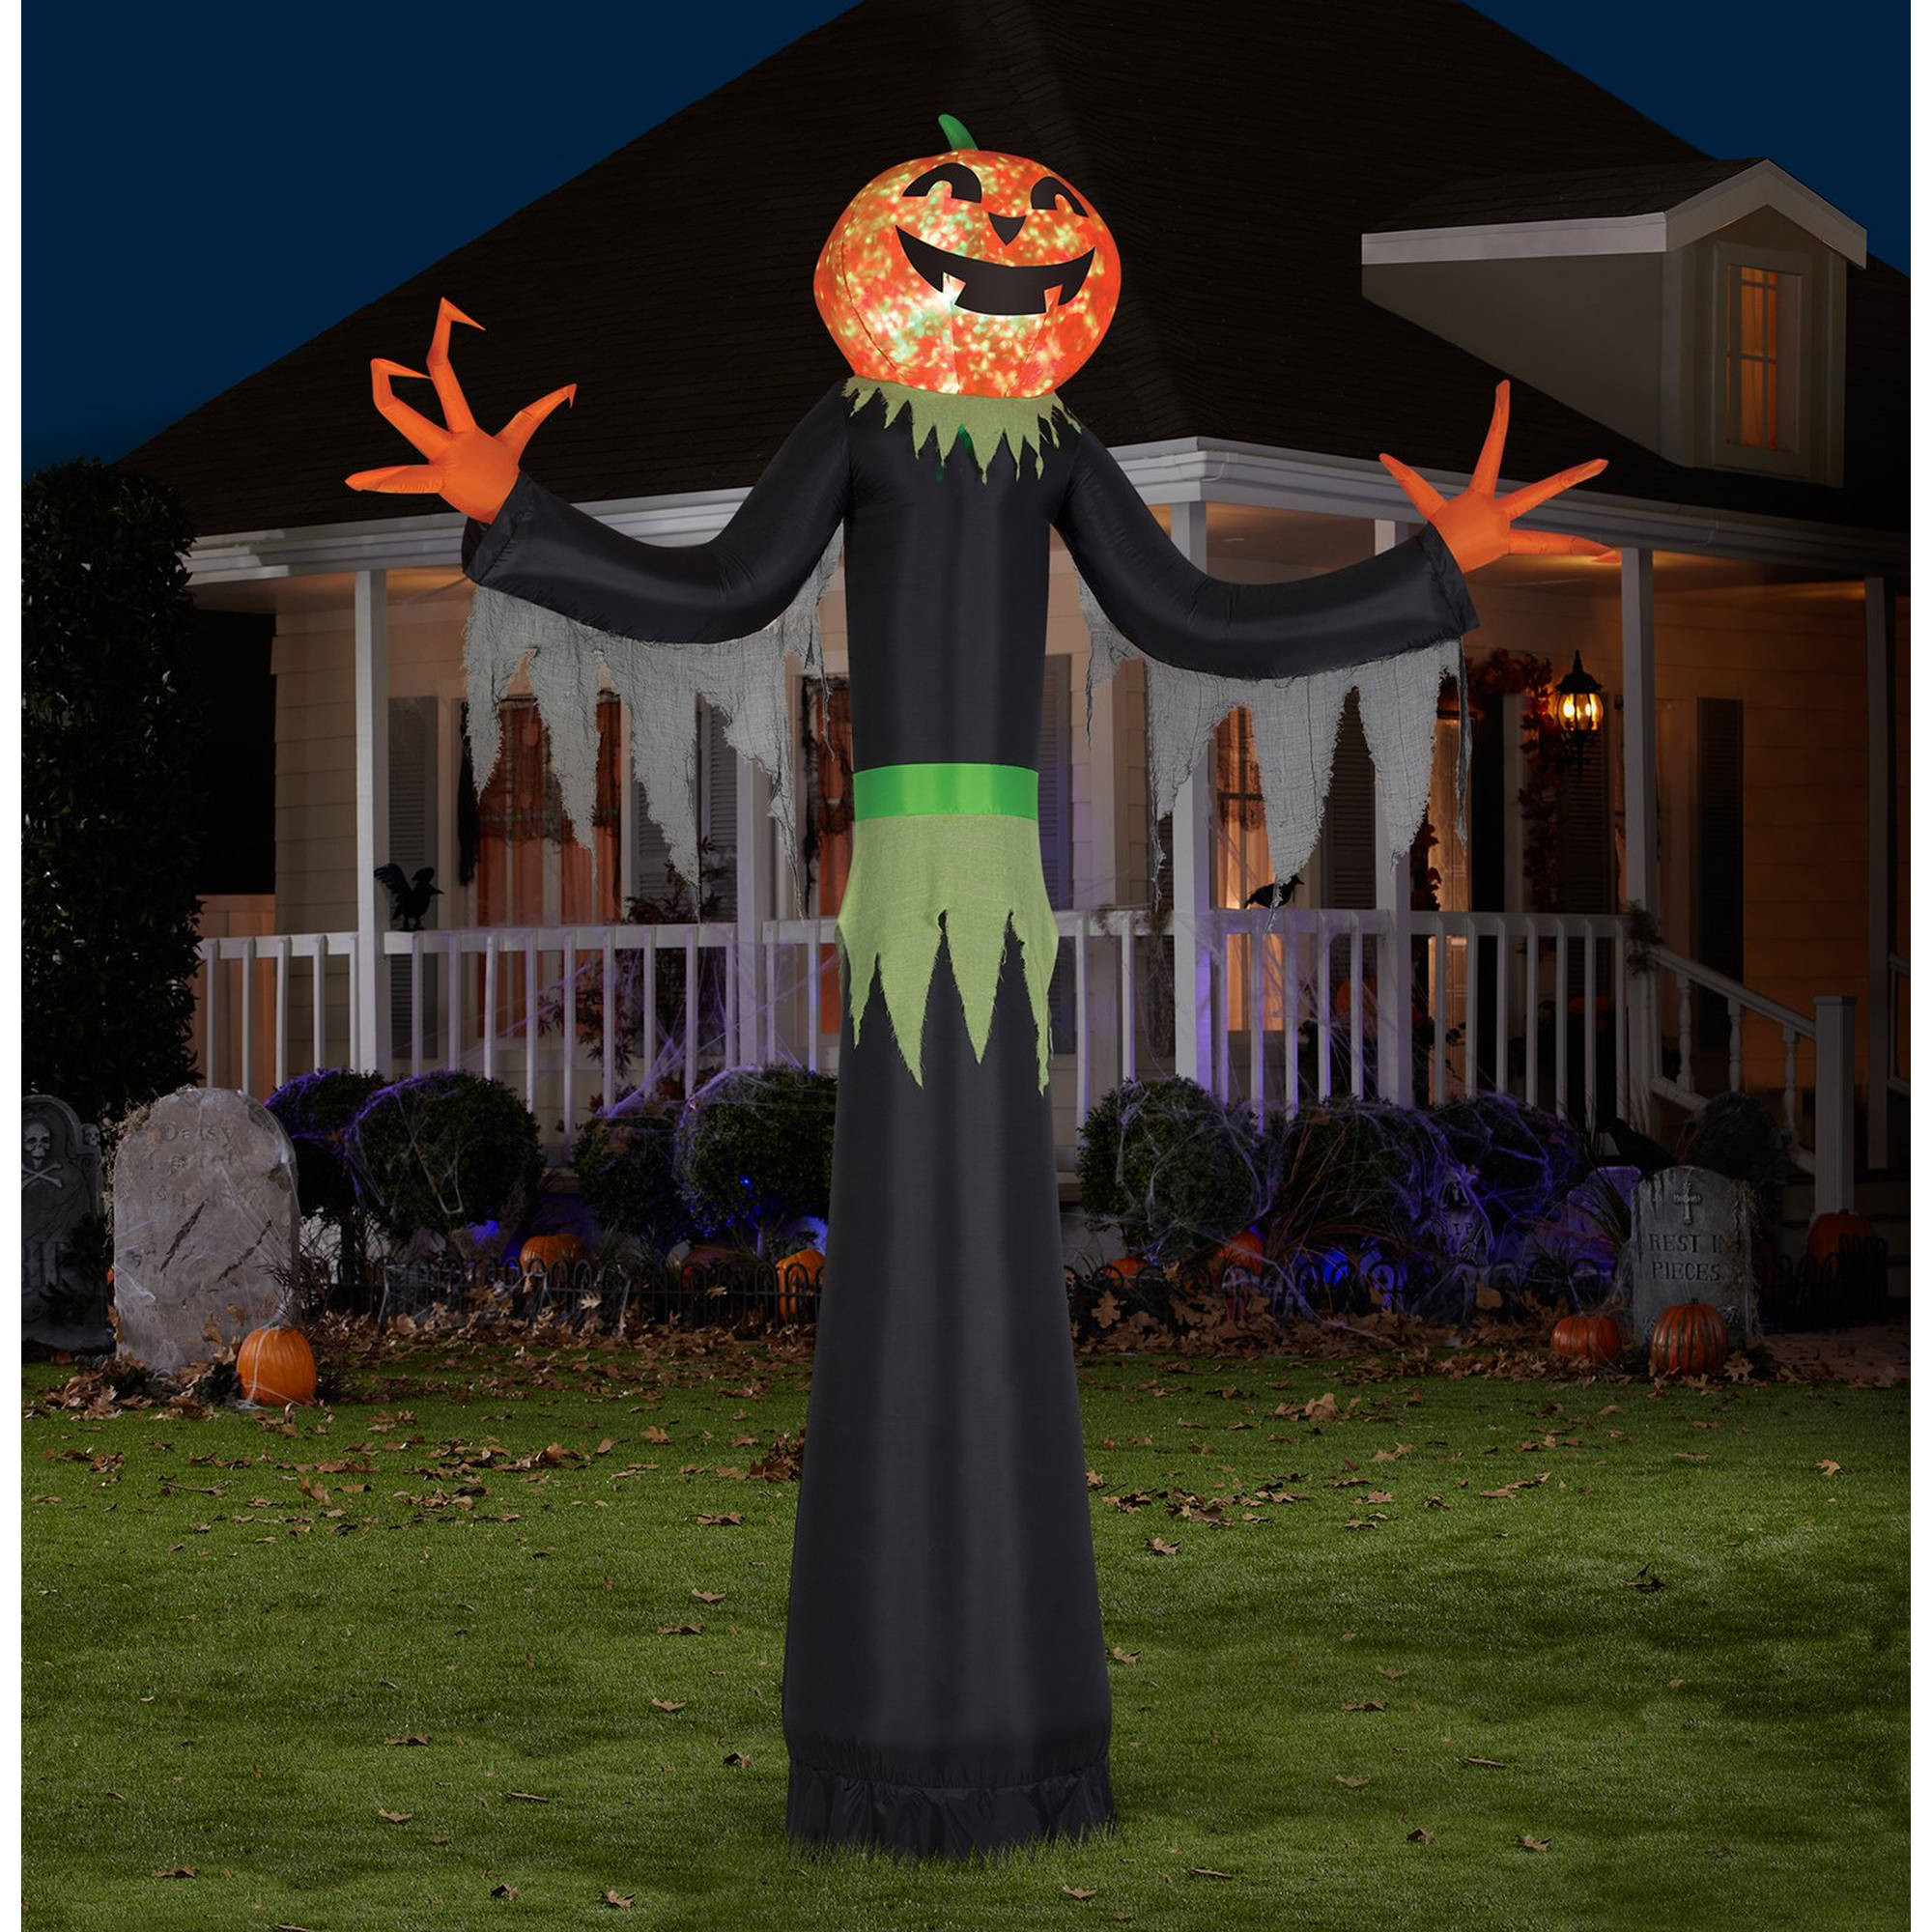 Outdoor Inflatable Halloween Decorations
 Gemmy Airblown Inflatable 6 X 4 Ghost Trio Halloween